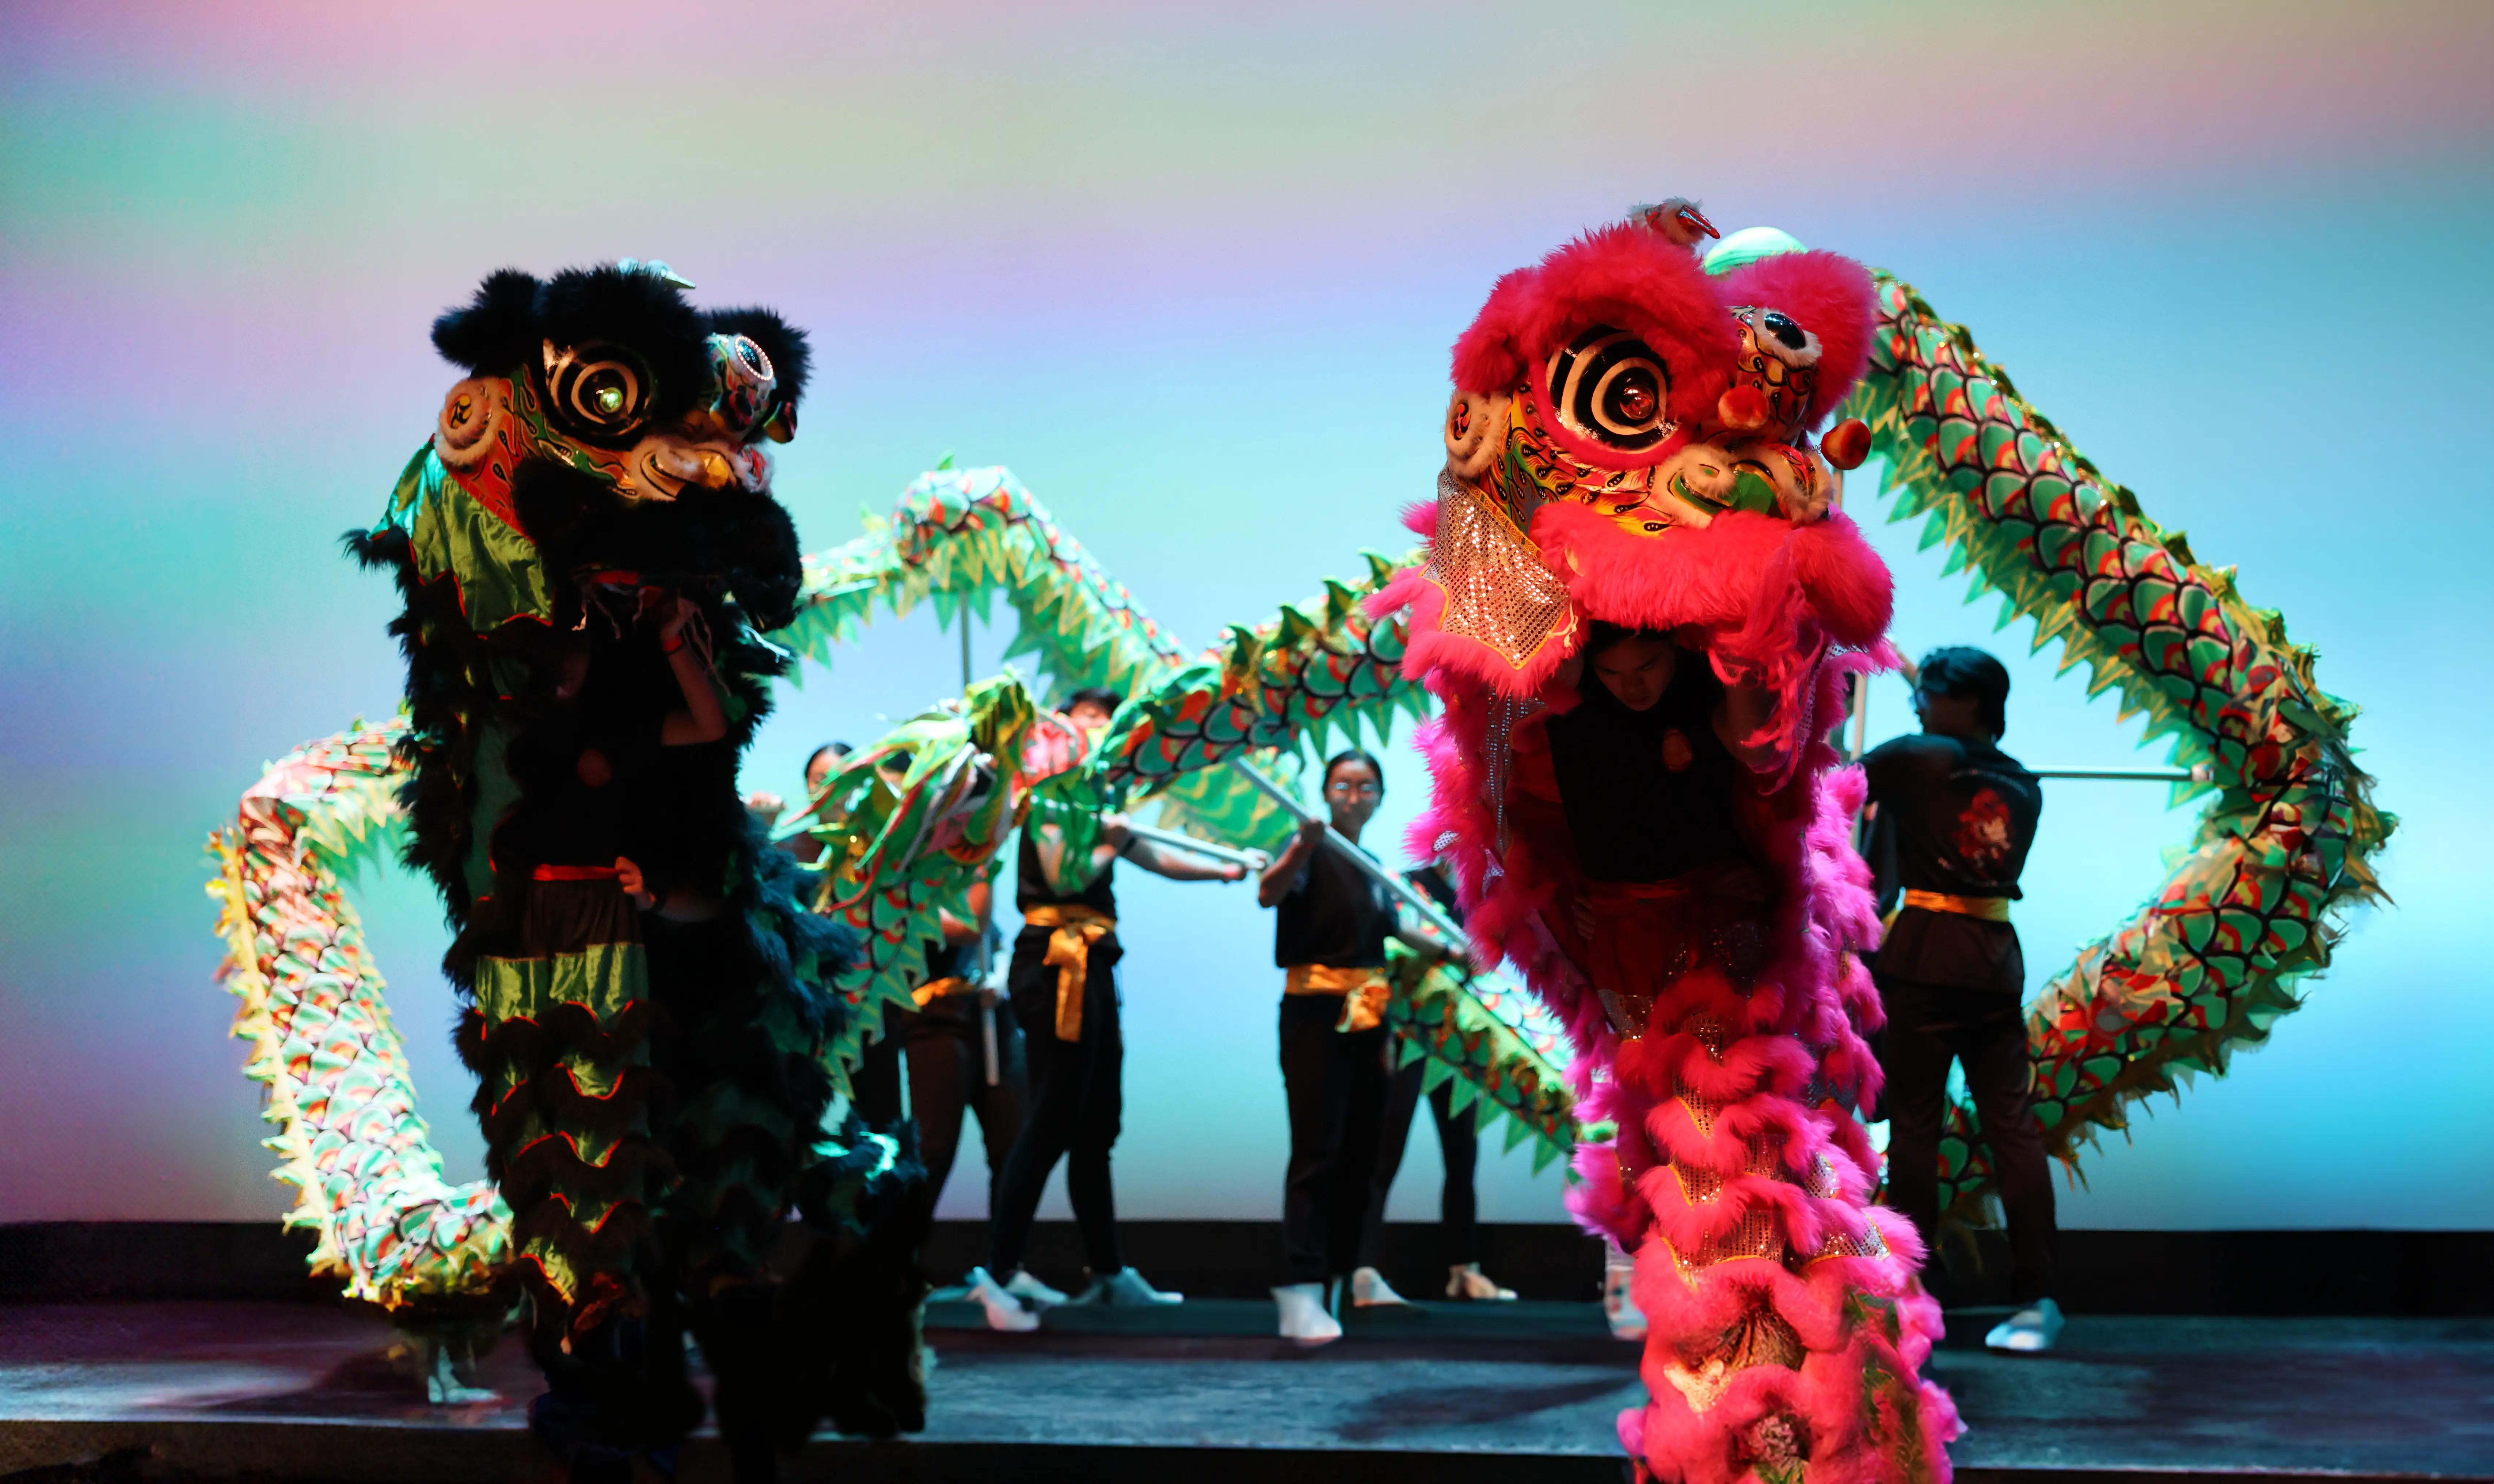 A picture of a dragon dance performance by Northeastern University Dragon and Lion Dance Troupe